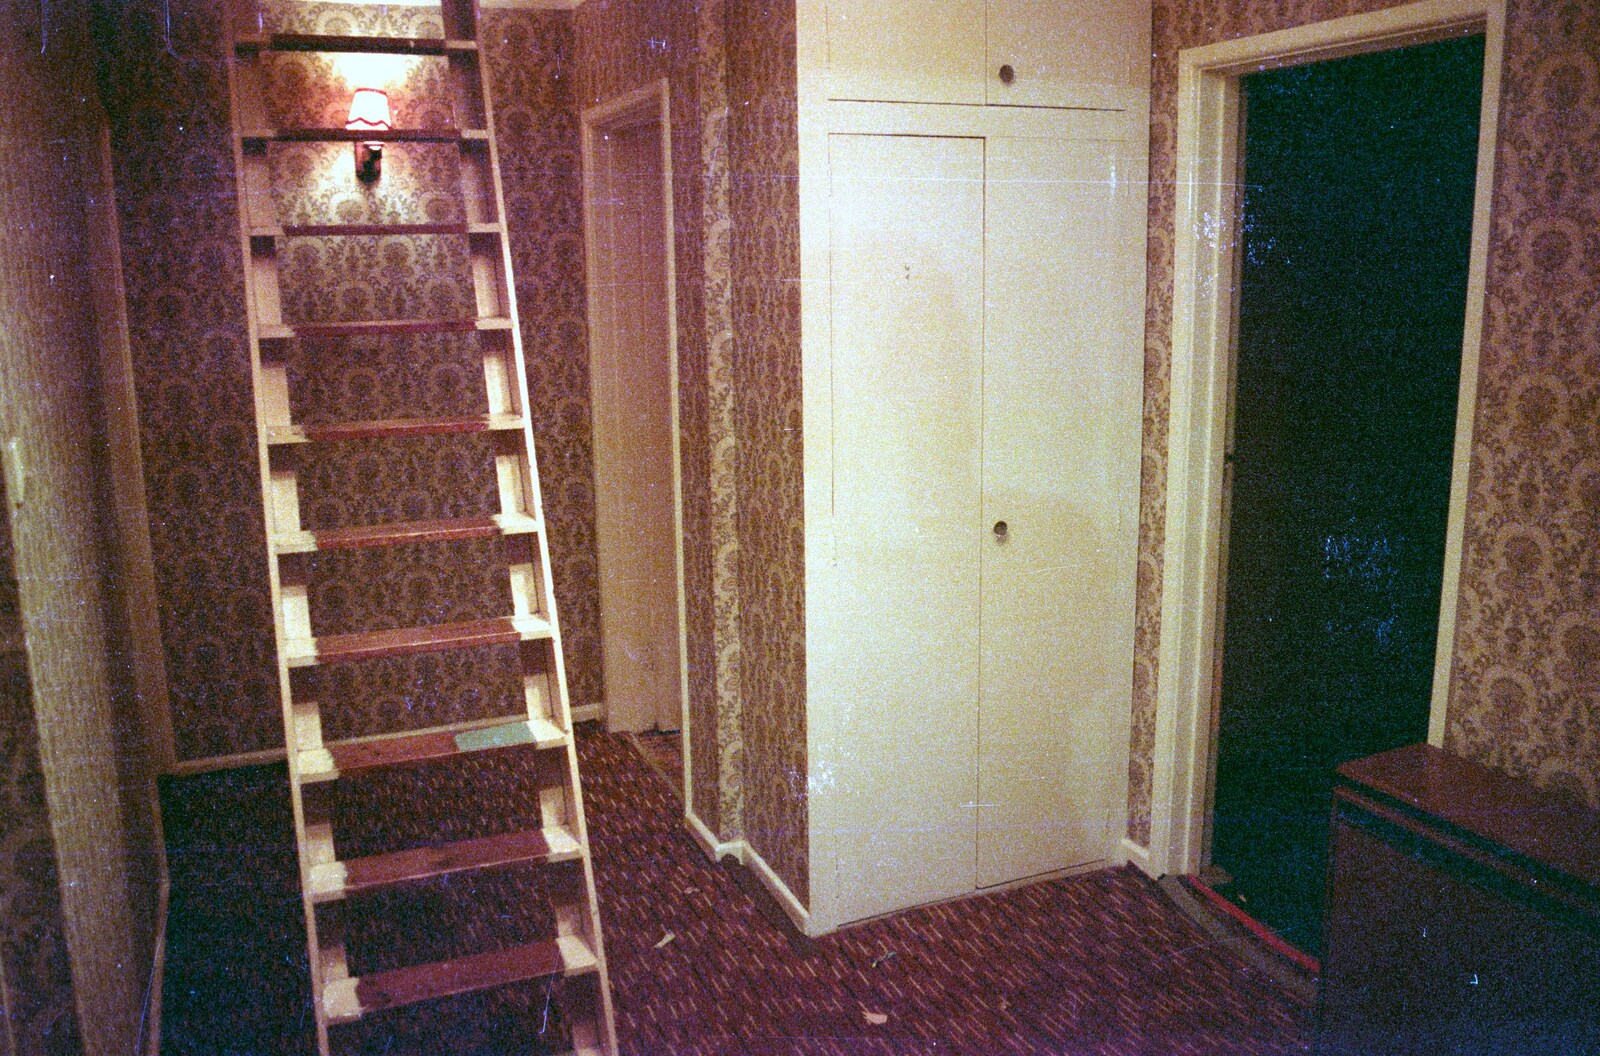 The almost-stepladder to the attic room from Bracken Way, Walkford, Dorset - 15th September 1986